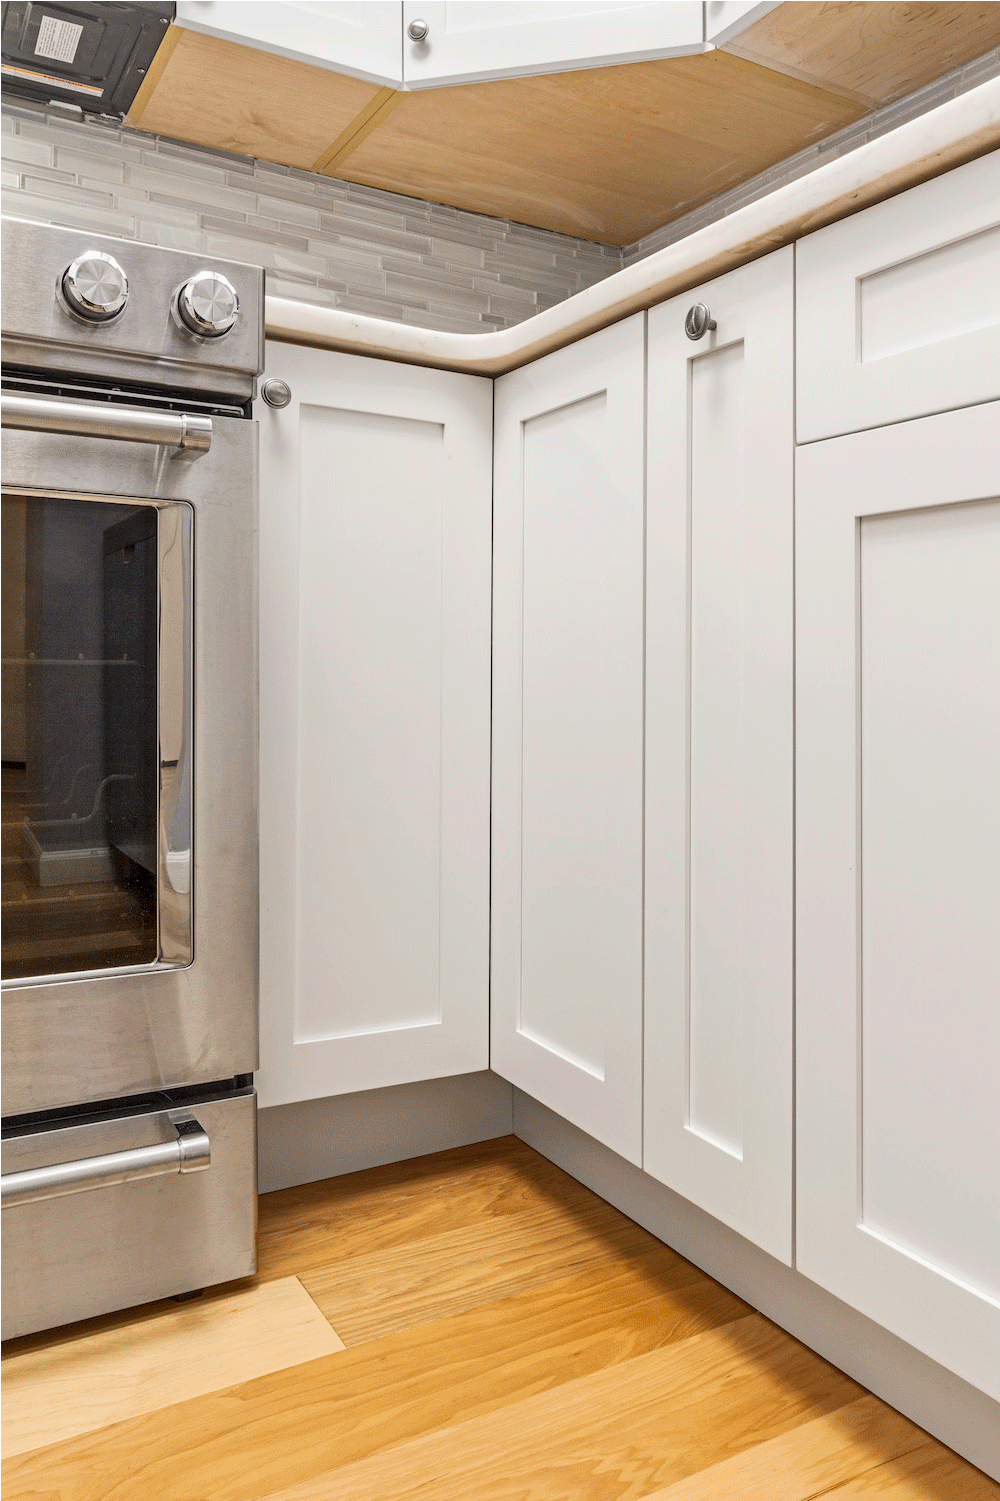 white kitchen cabinets with gray knob and silver appliance along with gray backsplash after renovation